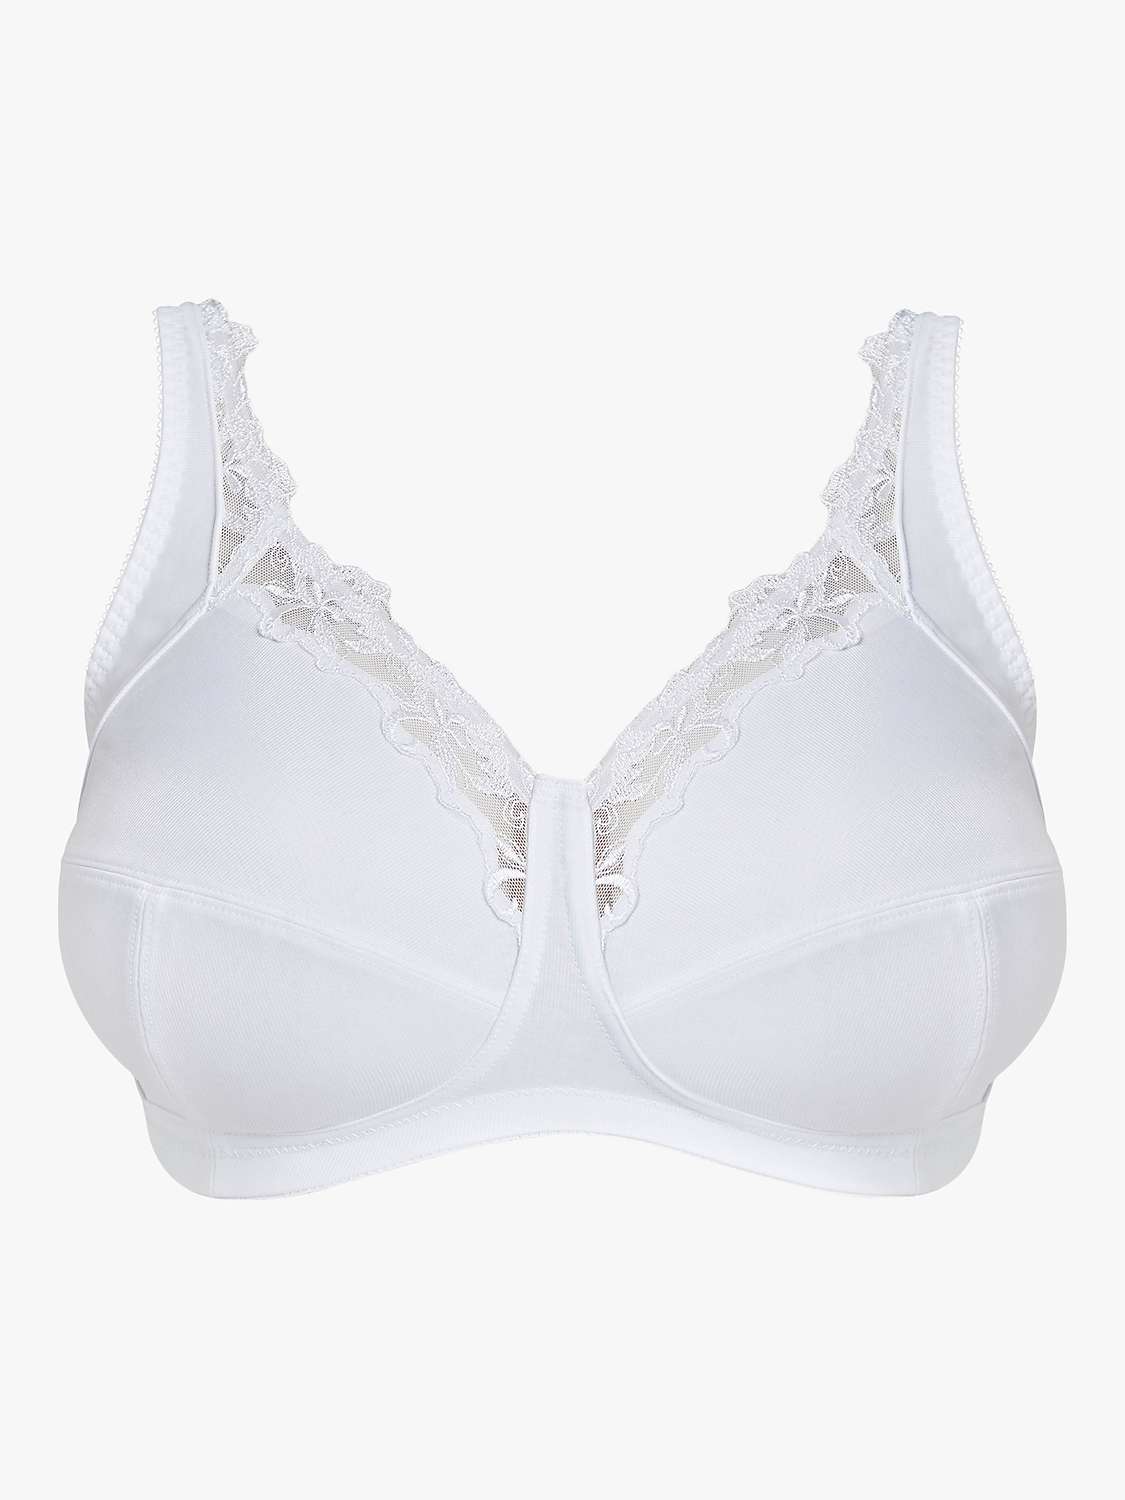 Buy Royce Robyn Non-Wired Full Cup Bra, White Online at johnlewis.com